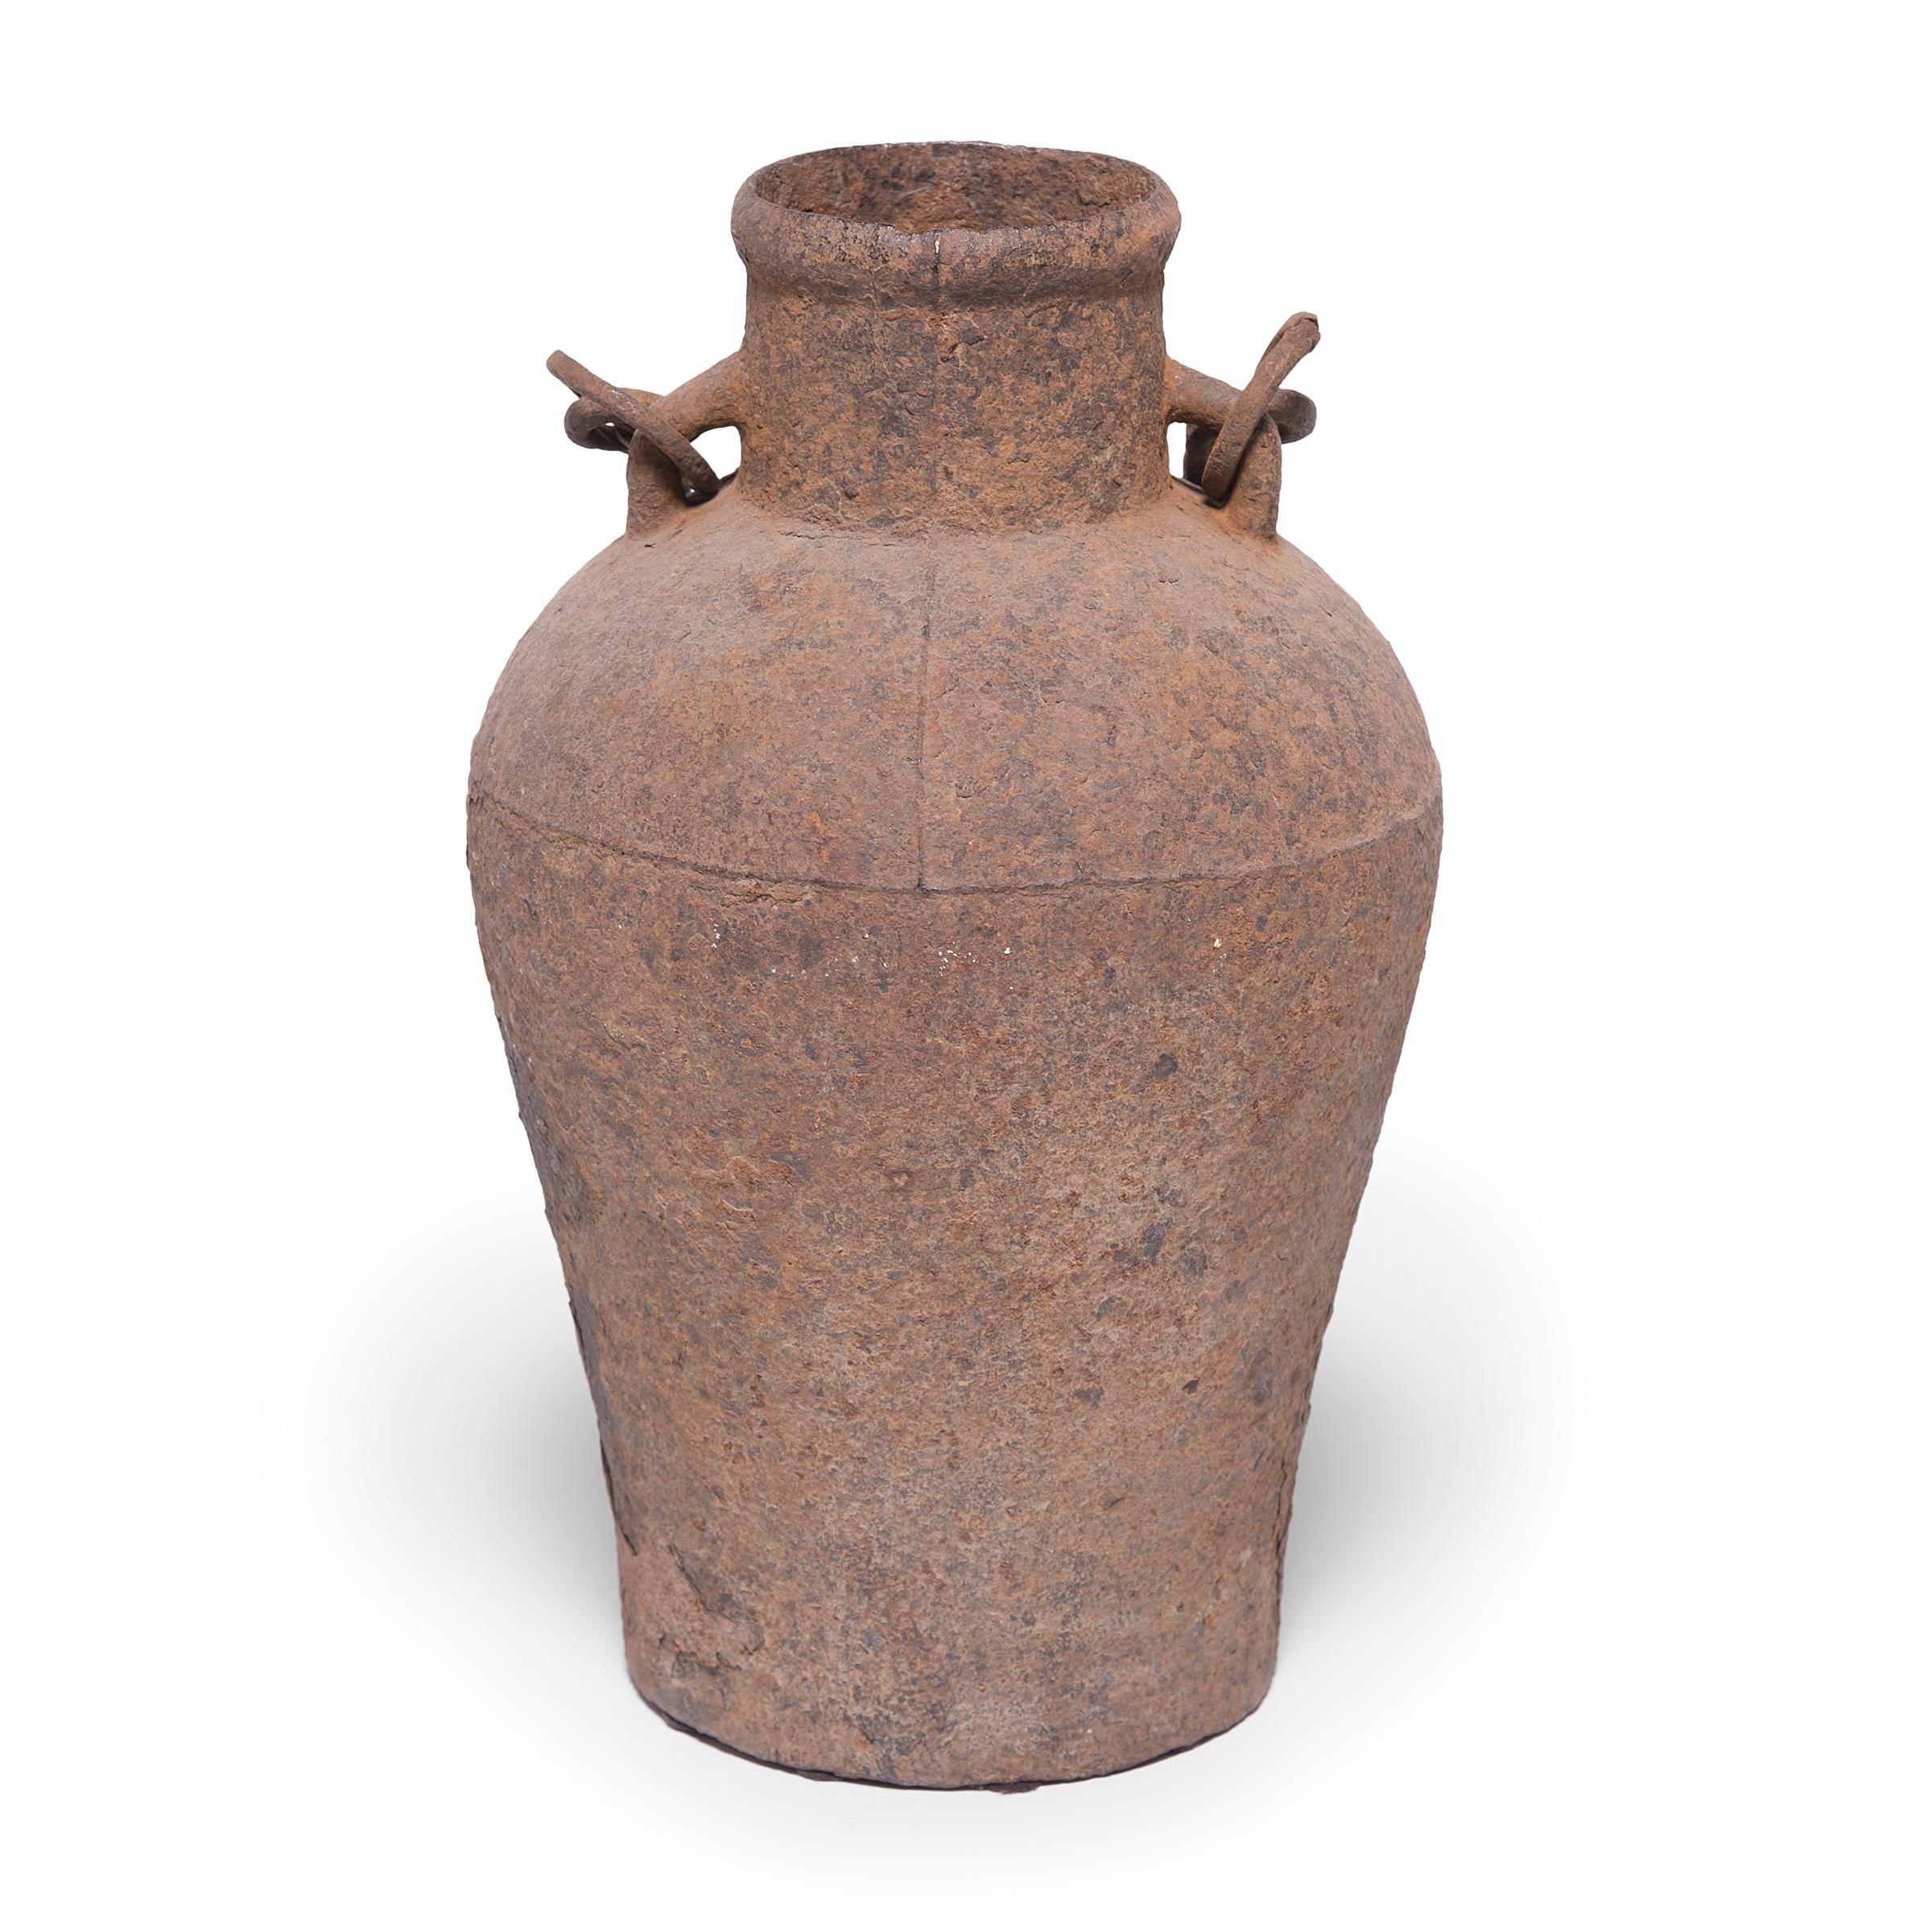 This cast-iron vessel has an elegant form reminiscent of the beautiful ironwork, bronzes, and ceramics perfected by Chinese artisans thousands of years ago. A century ago this jar would have been purely utilitarian, but over time, as the iron has